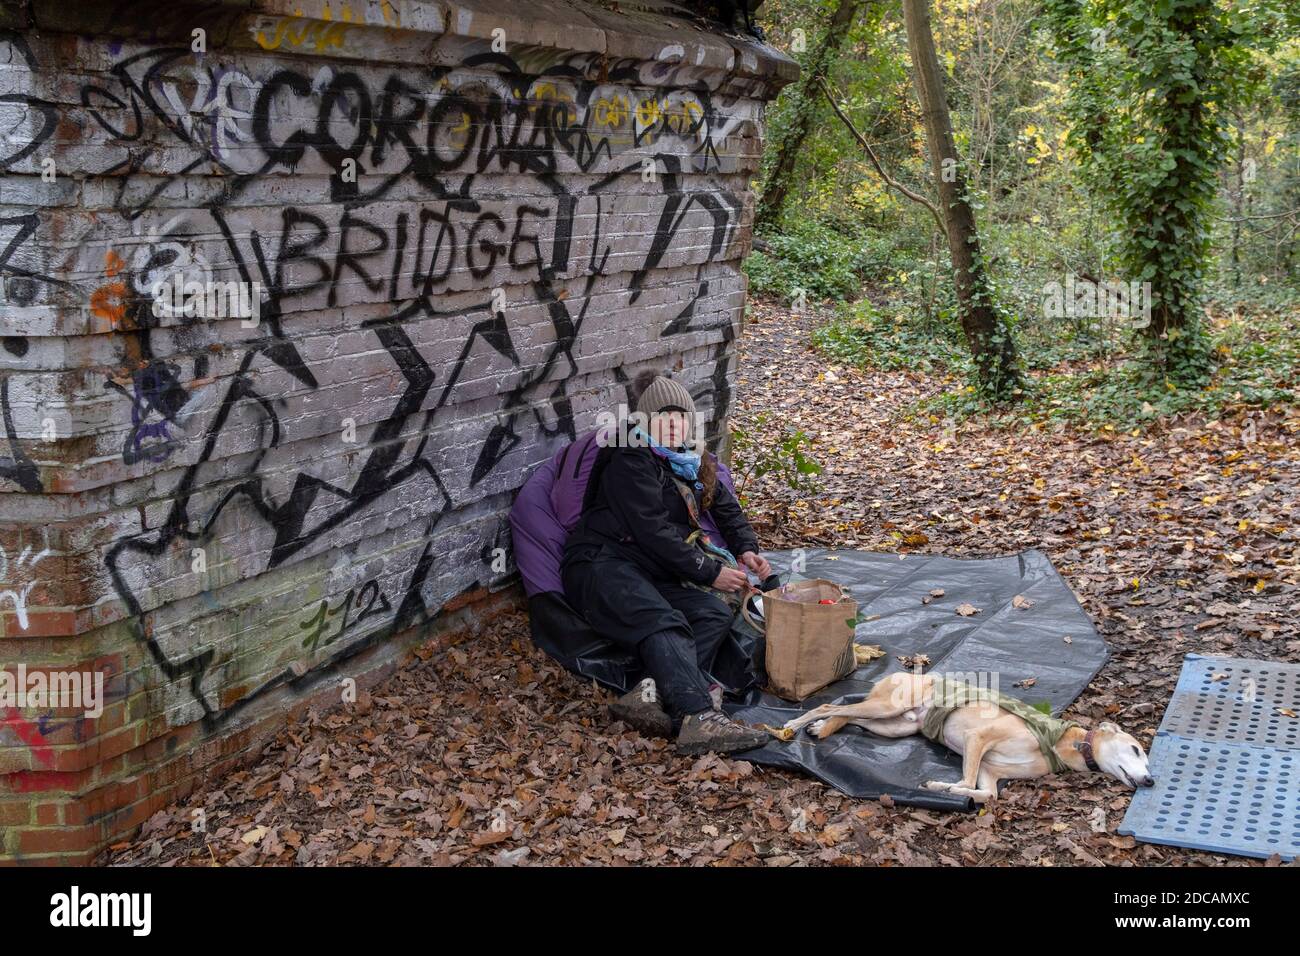 An activist against the proposed felling of two 100+ year-old oak trees, occupies the site under  'Pissarro's' footbridge whose renovation has been deemed necessary by the Southwark Council , on 17th November 2020, in London, England. The Nunhead to Crystal Palace (High Level) railway once passed through the Wood and Impressionist artist Camille Pissarro (1830–1903) famously painted a railway landscape from the bridge in the 1870s. Sydenham Hill Wood forms part of the largest remaining tract of the old Great North Wood, a vast area of worked coppices and wooded commons that once stretched acro Stock Photo